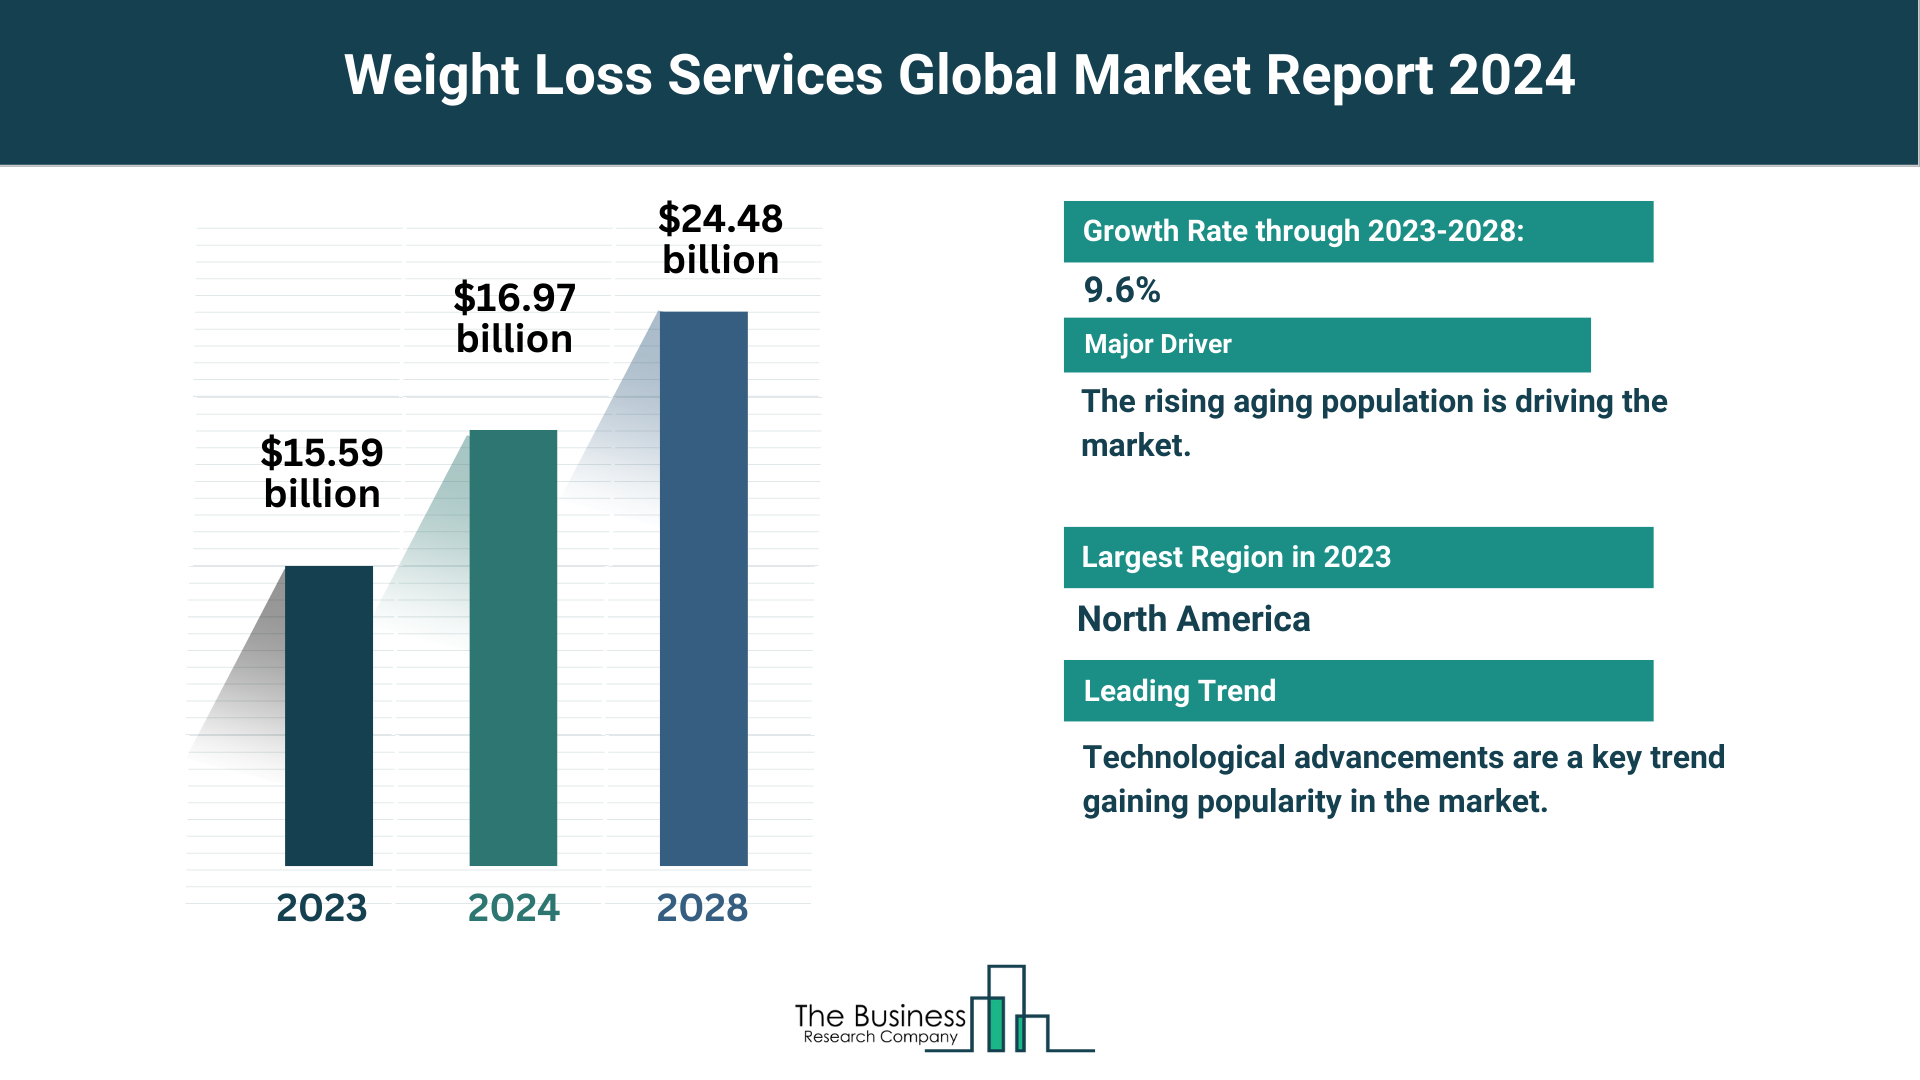 Global Weight Loss Services Market